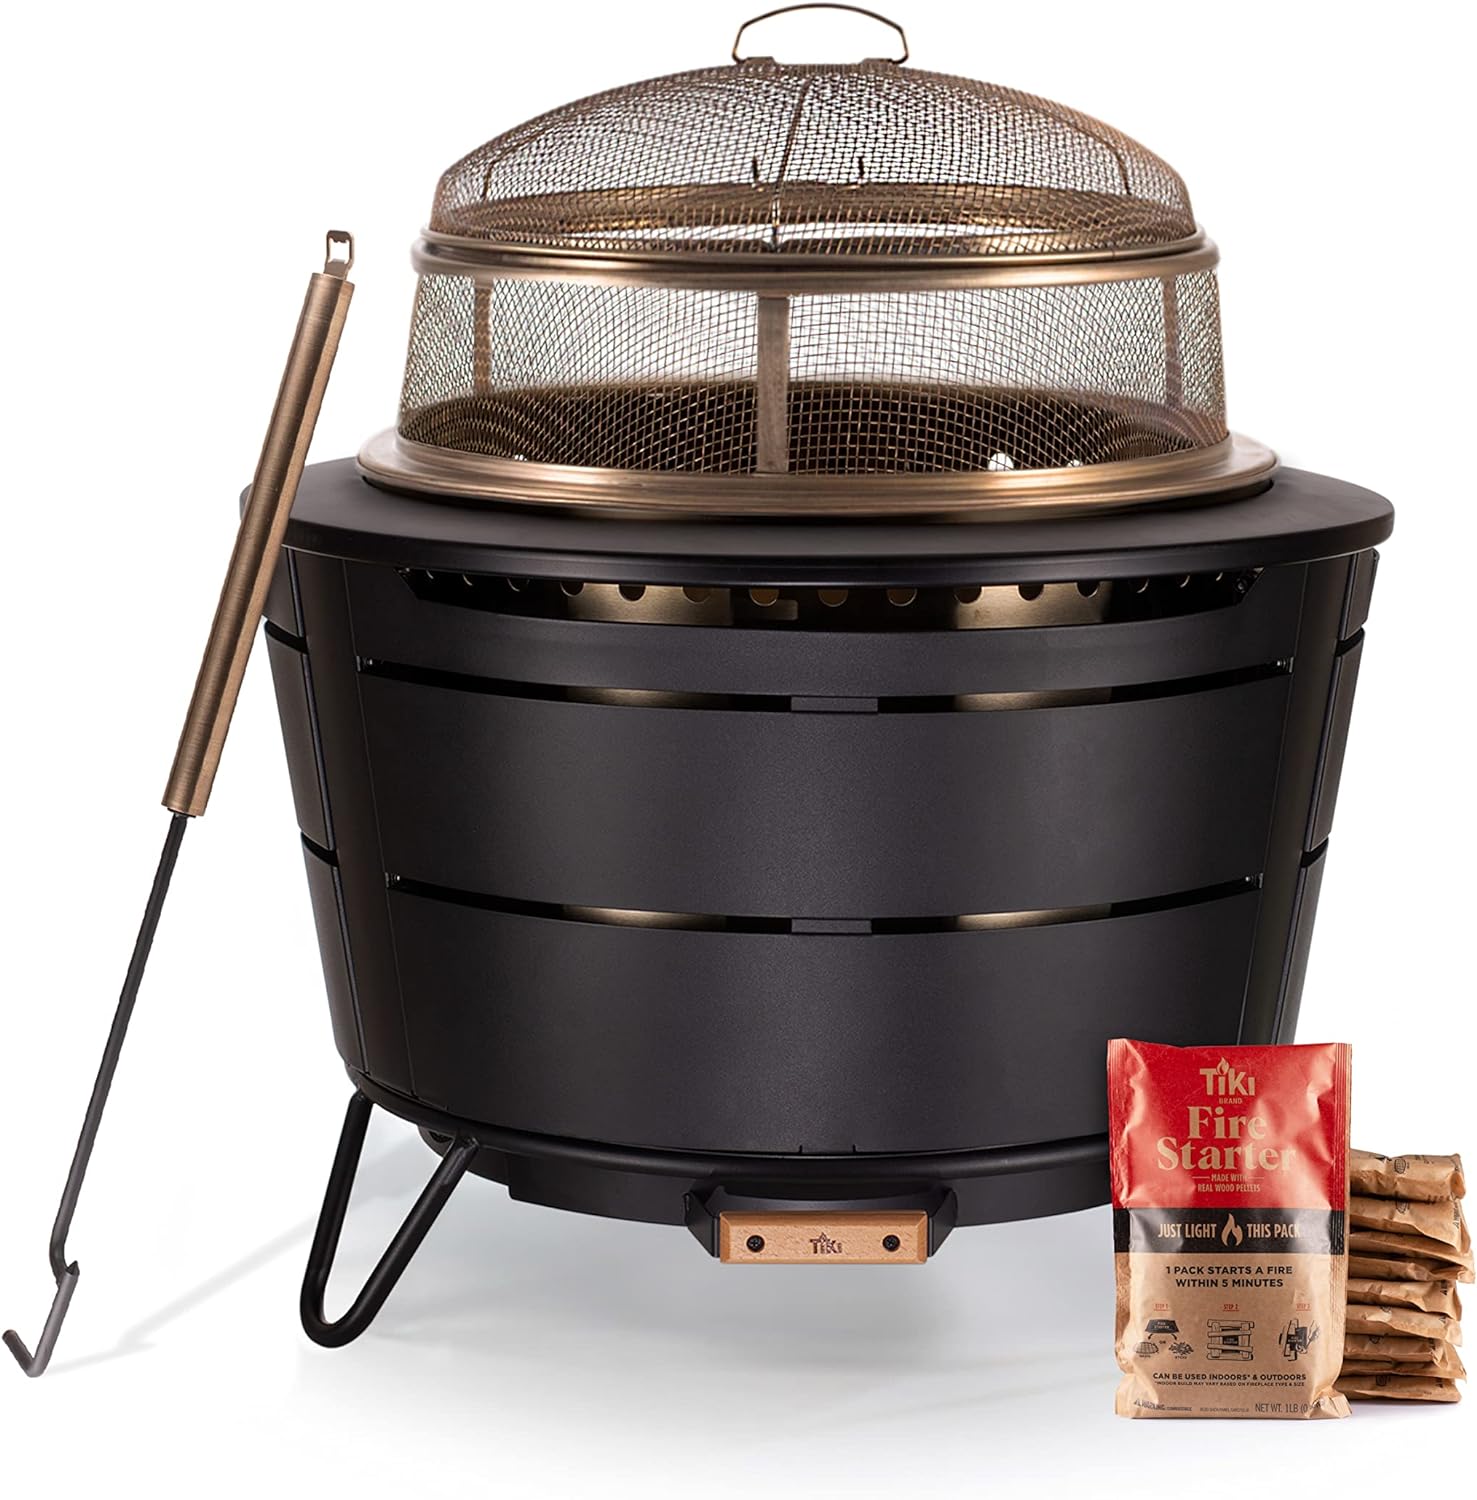 TIKI Brand Reunion Smokeless Fire Pit with Screen and Poker and 10-Pack Fire Starters Bundle